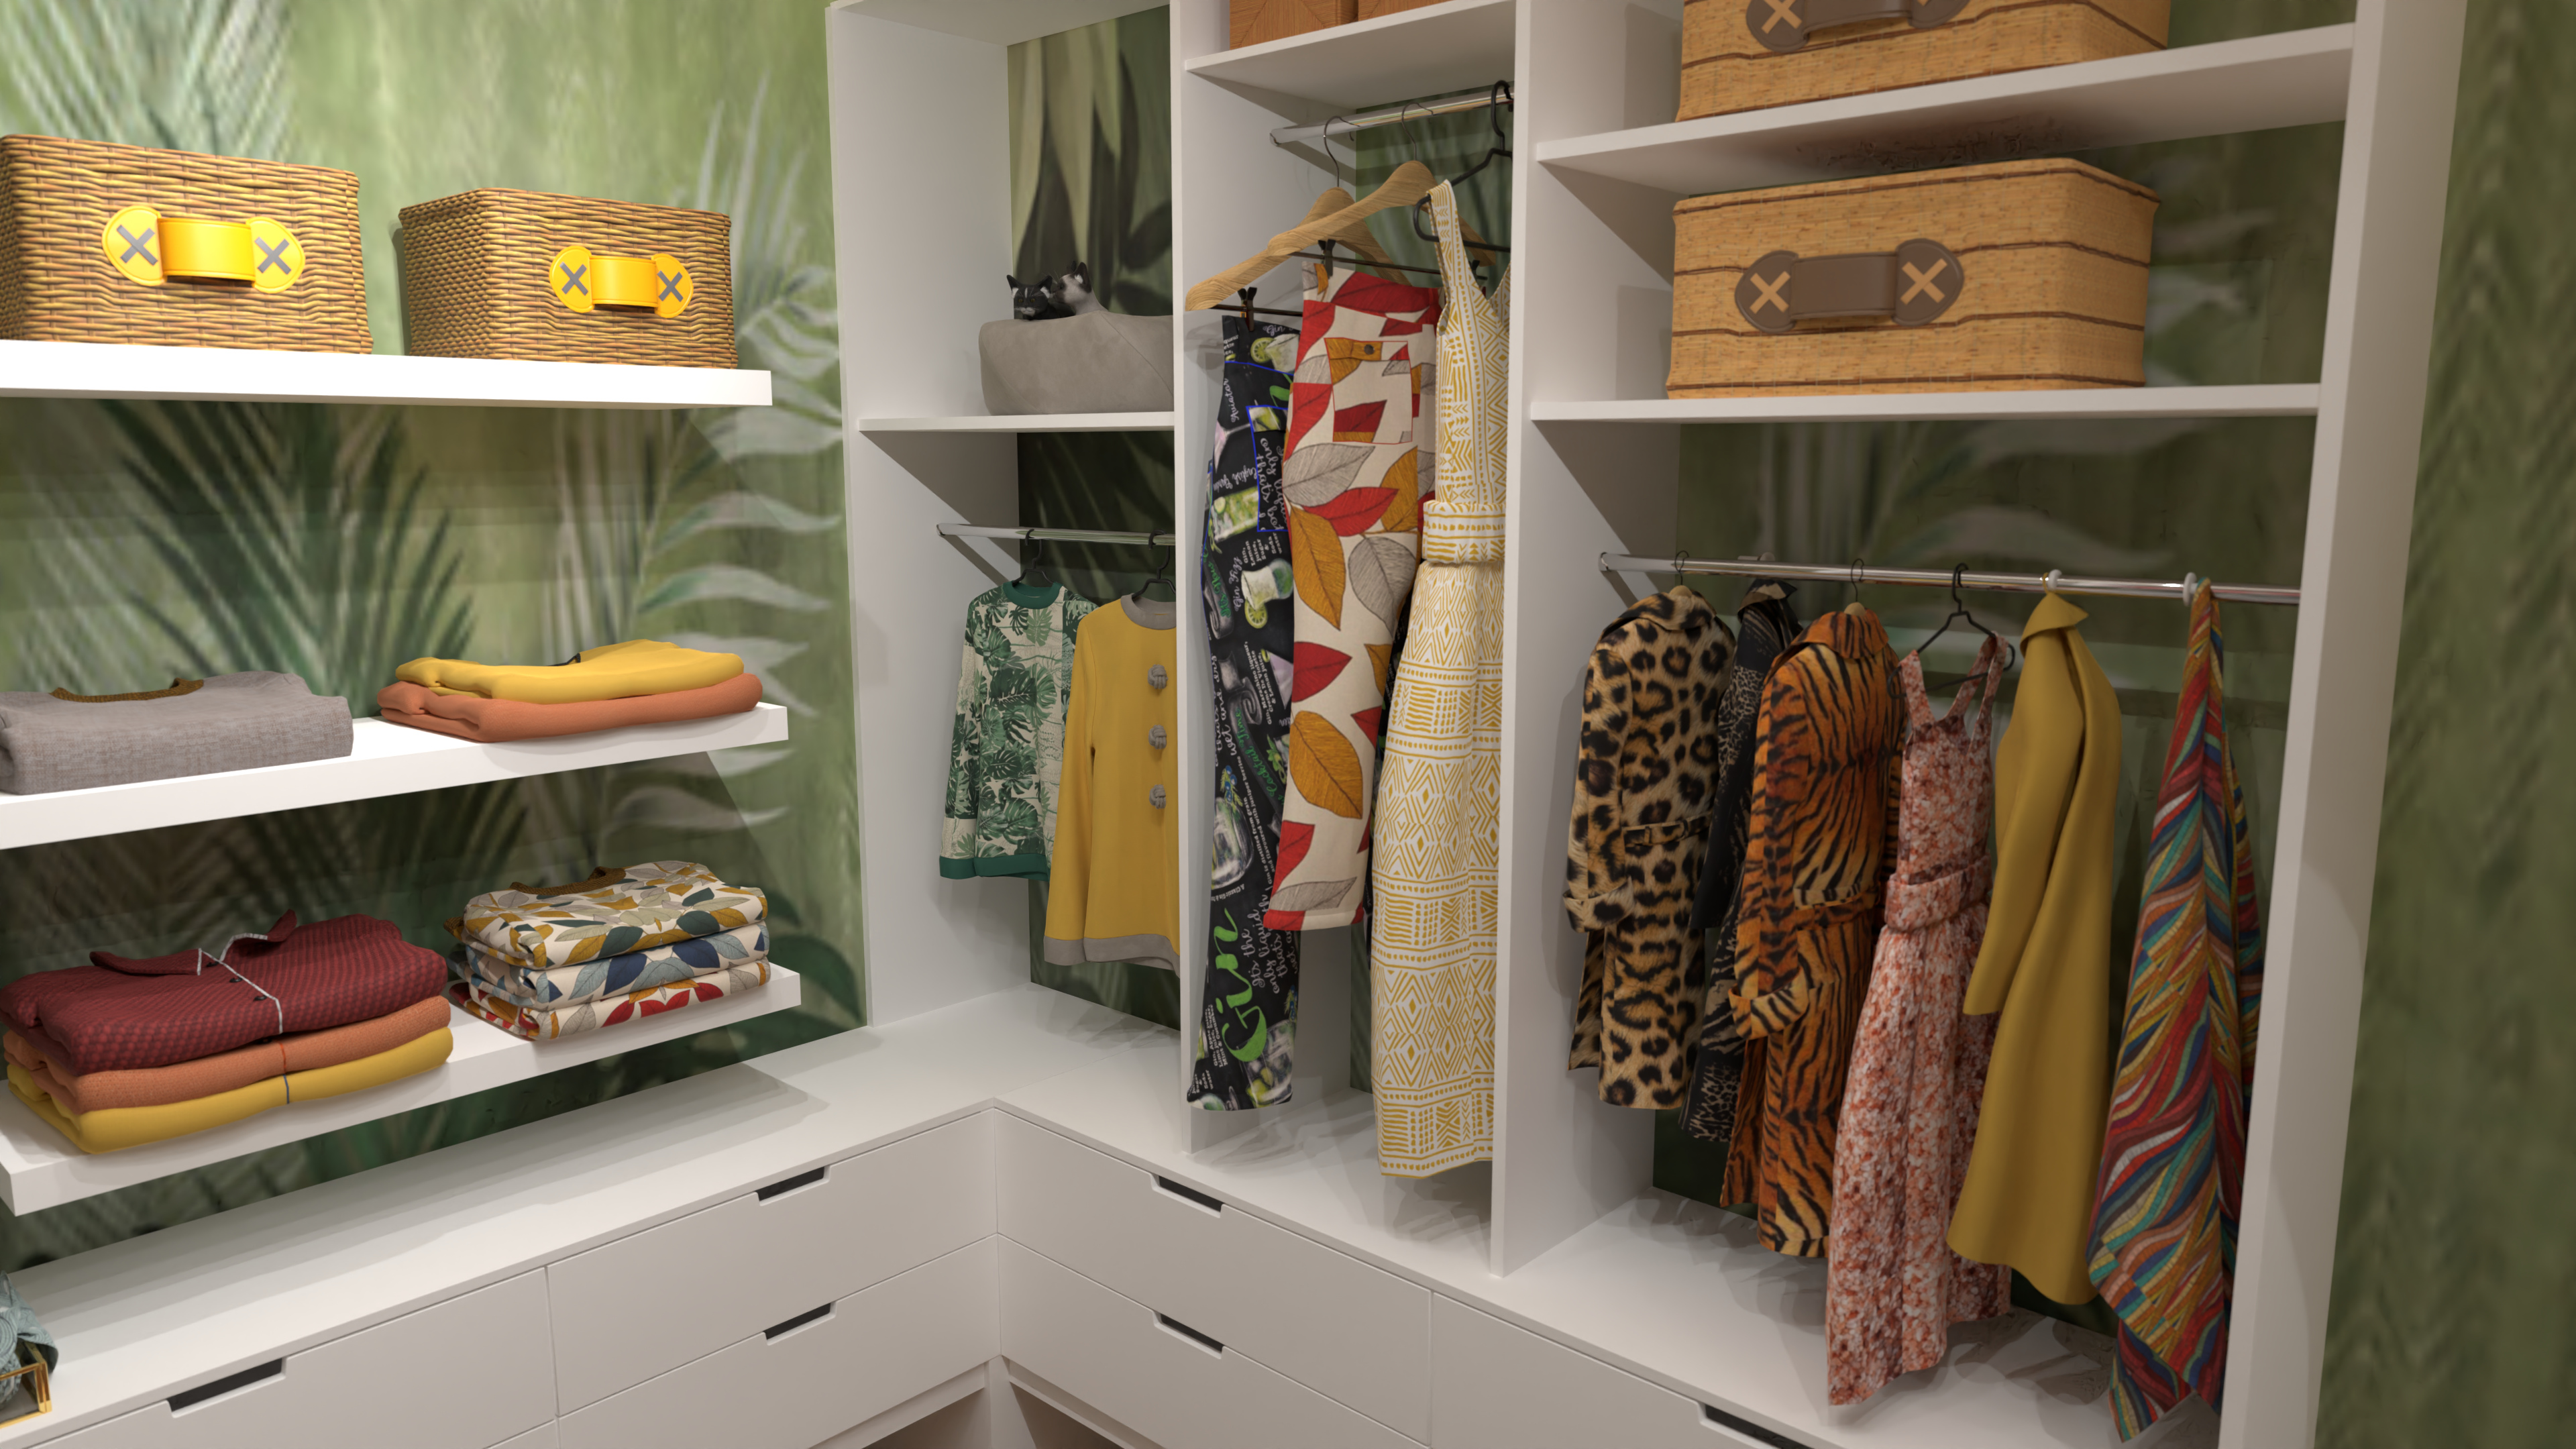 Walk-in closet #3 12889319 by Moonface image